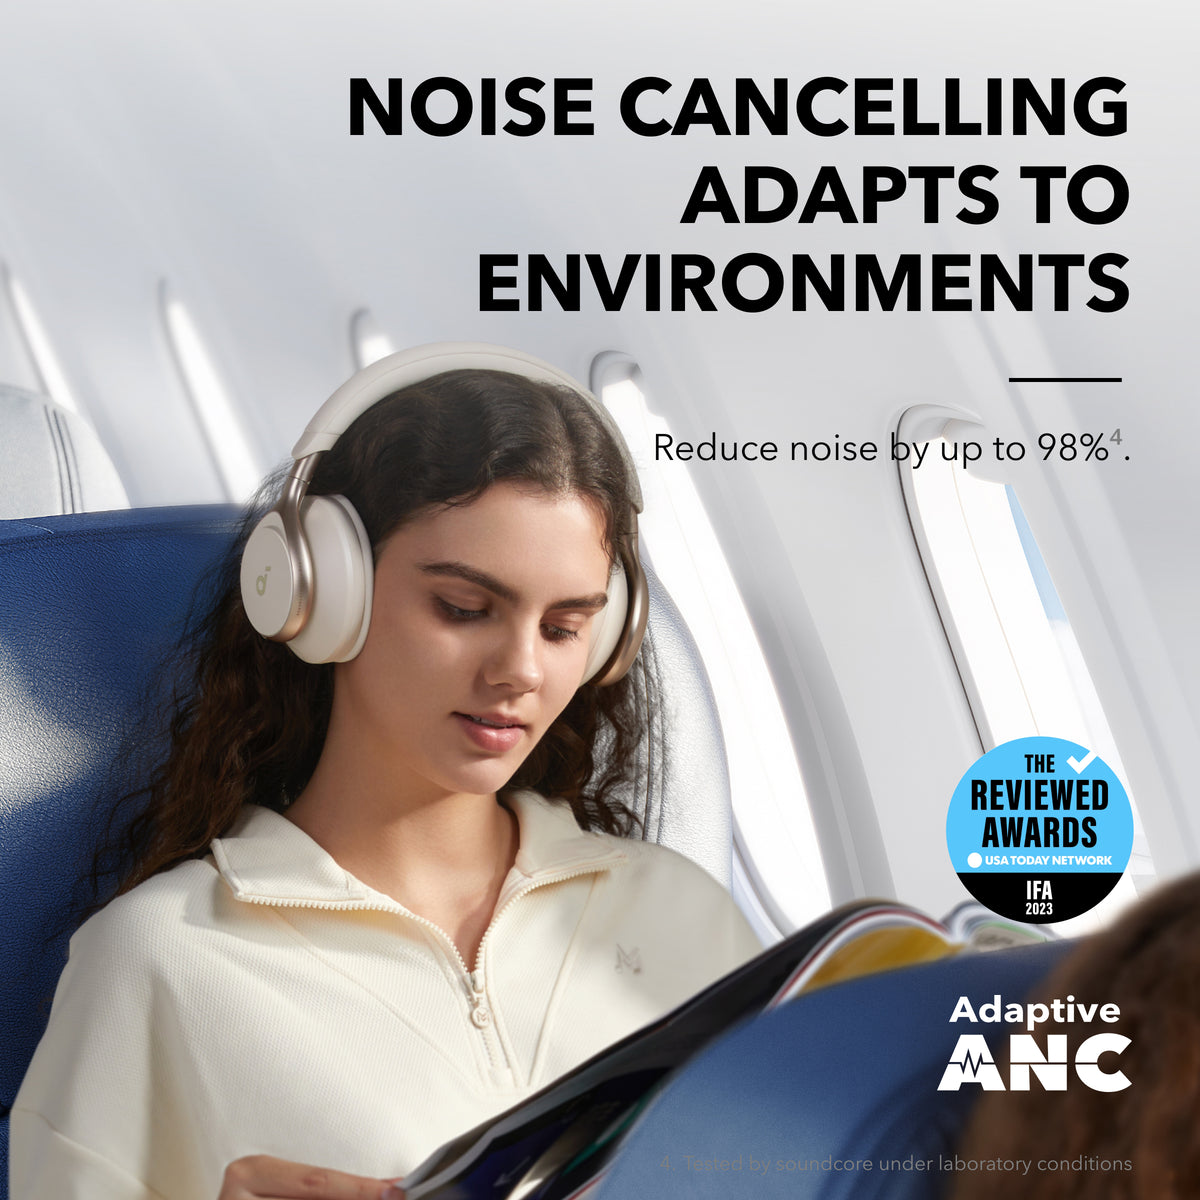 Anker Soundcore Space One - Active Noise Cancelling Wireless Headphones -  Latte Cream